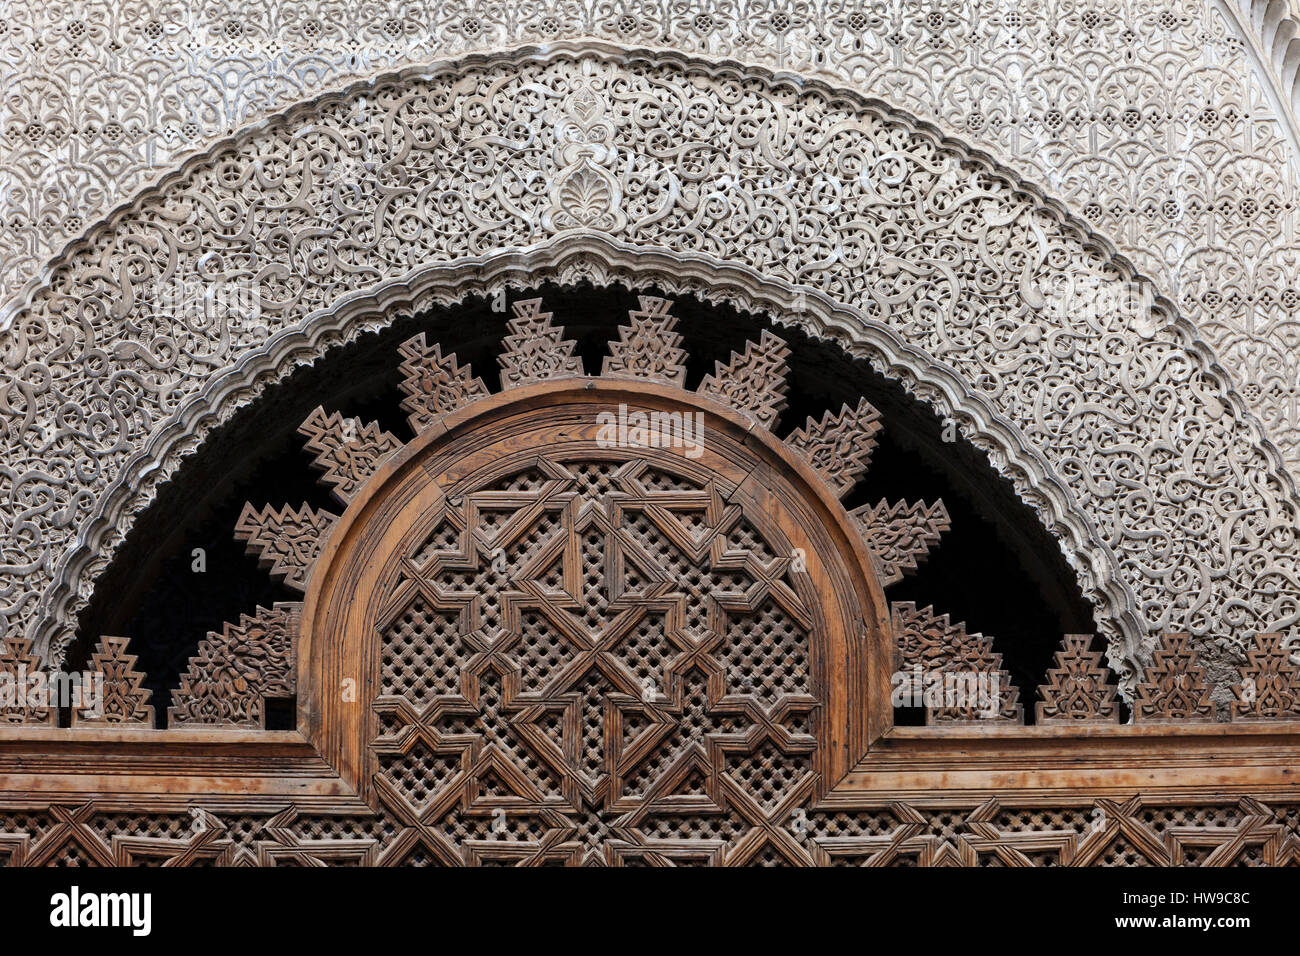 Fes, Morocco.  Carved Woodwork and Stucco  Decoration in the Attarine Medersa, Fes El-Bali. Stock Photo